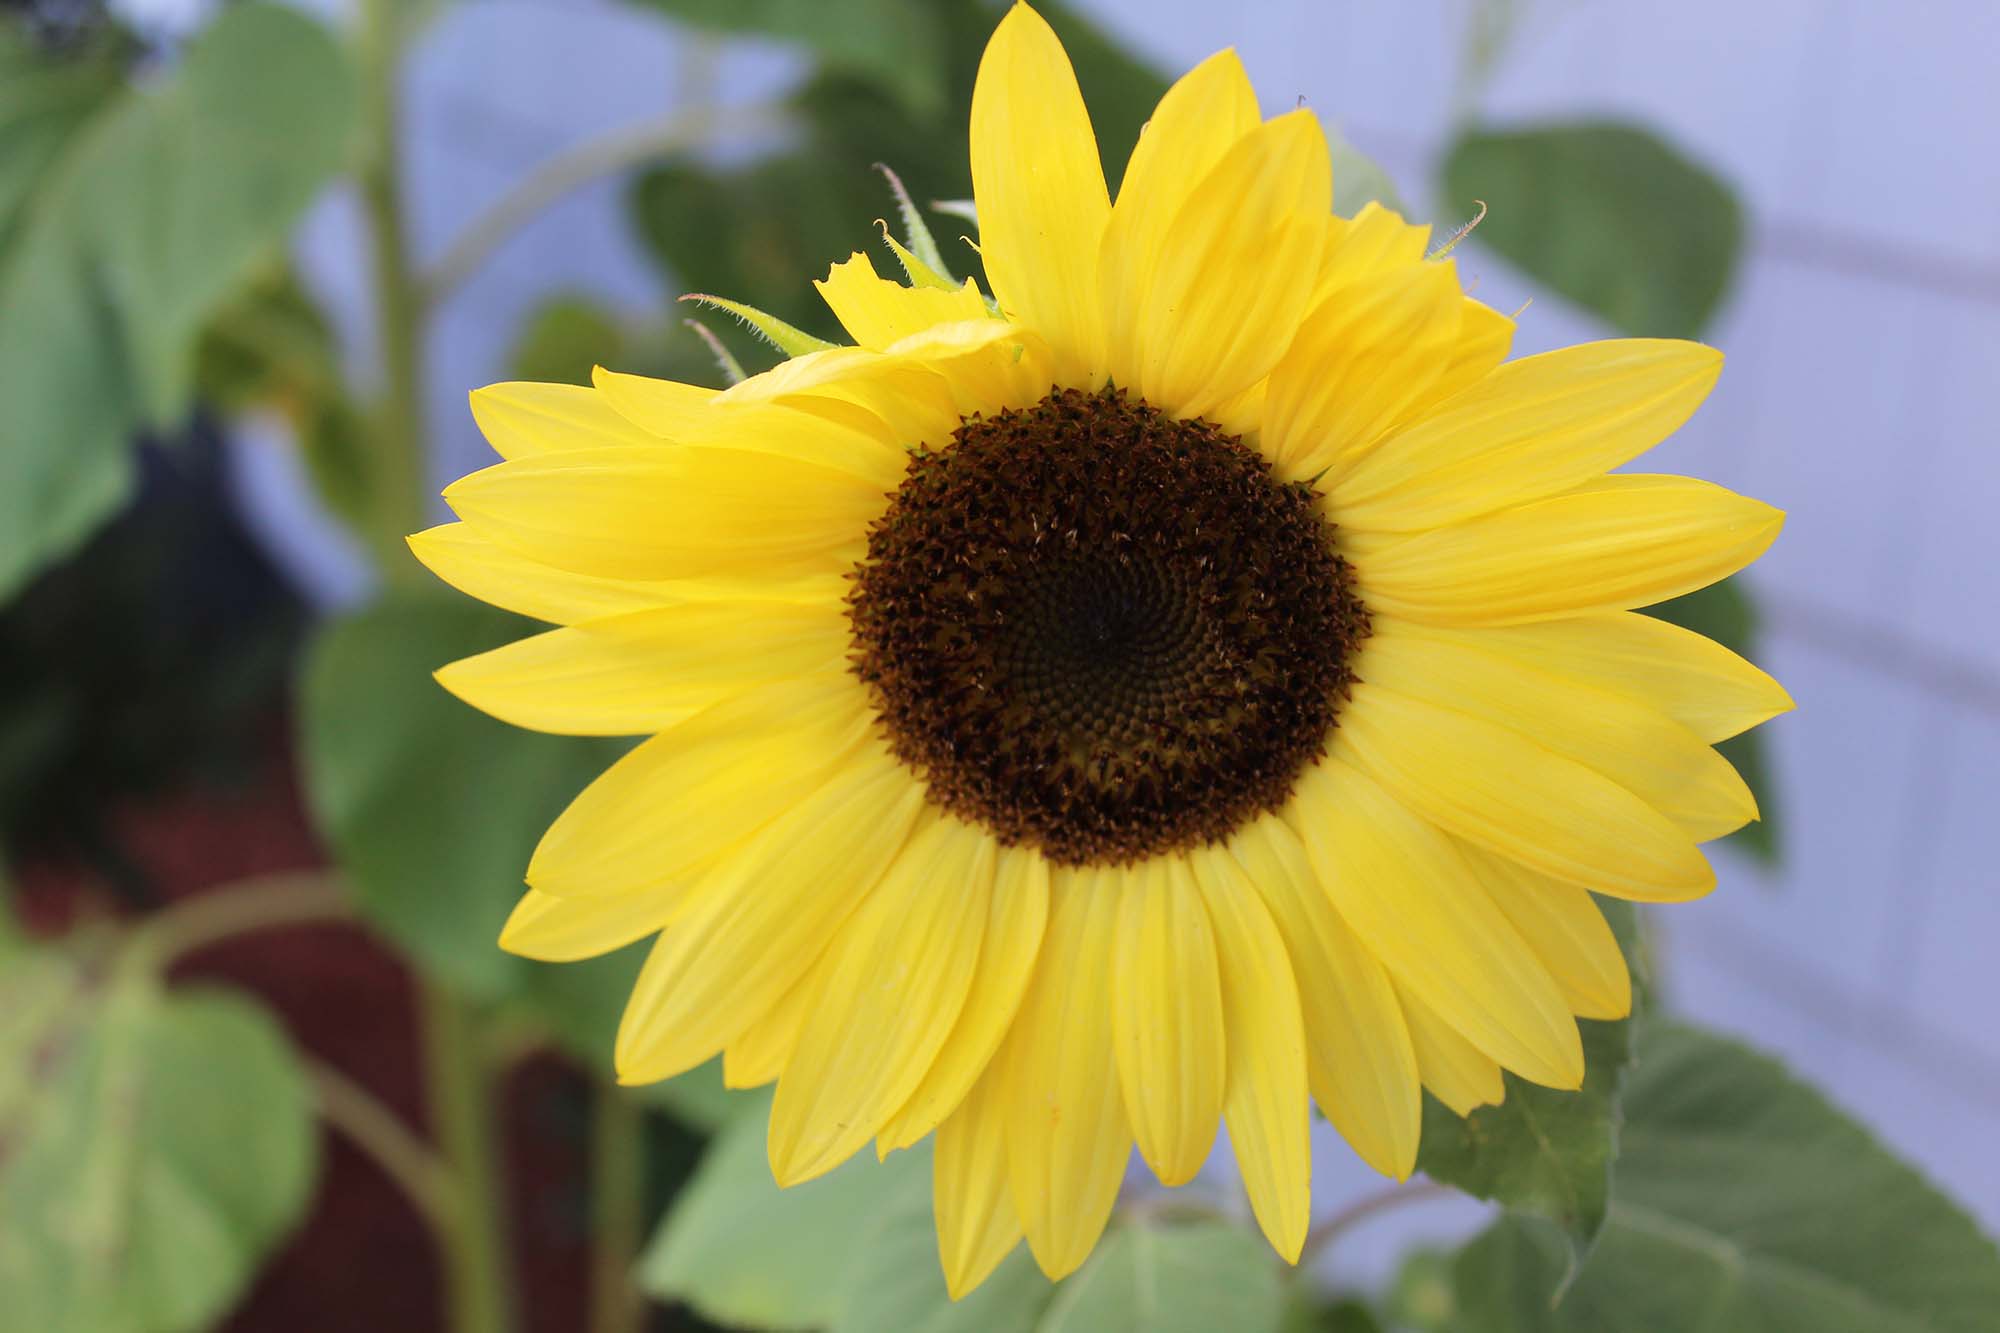 Close-up of a yellow sunflower with an out-of-focus background